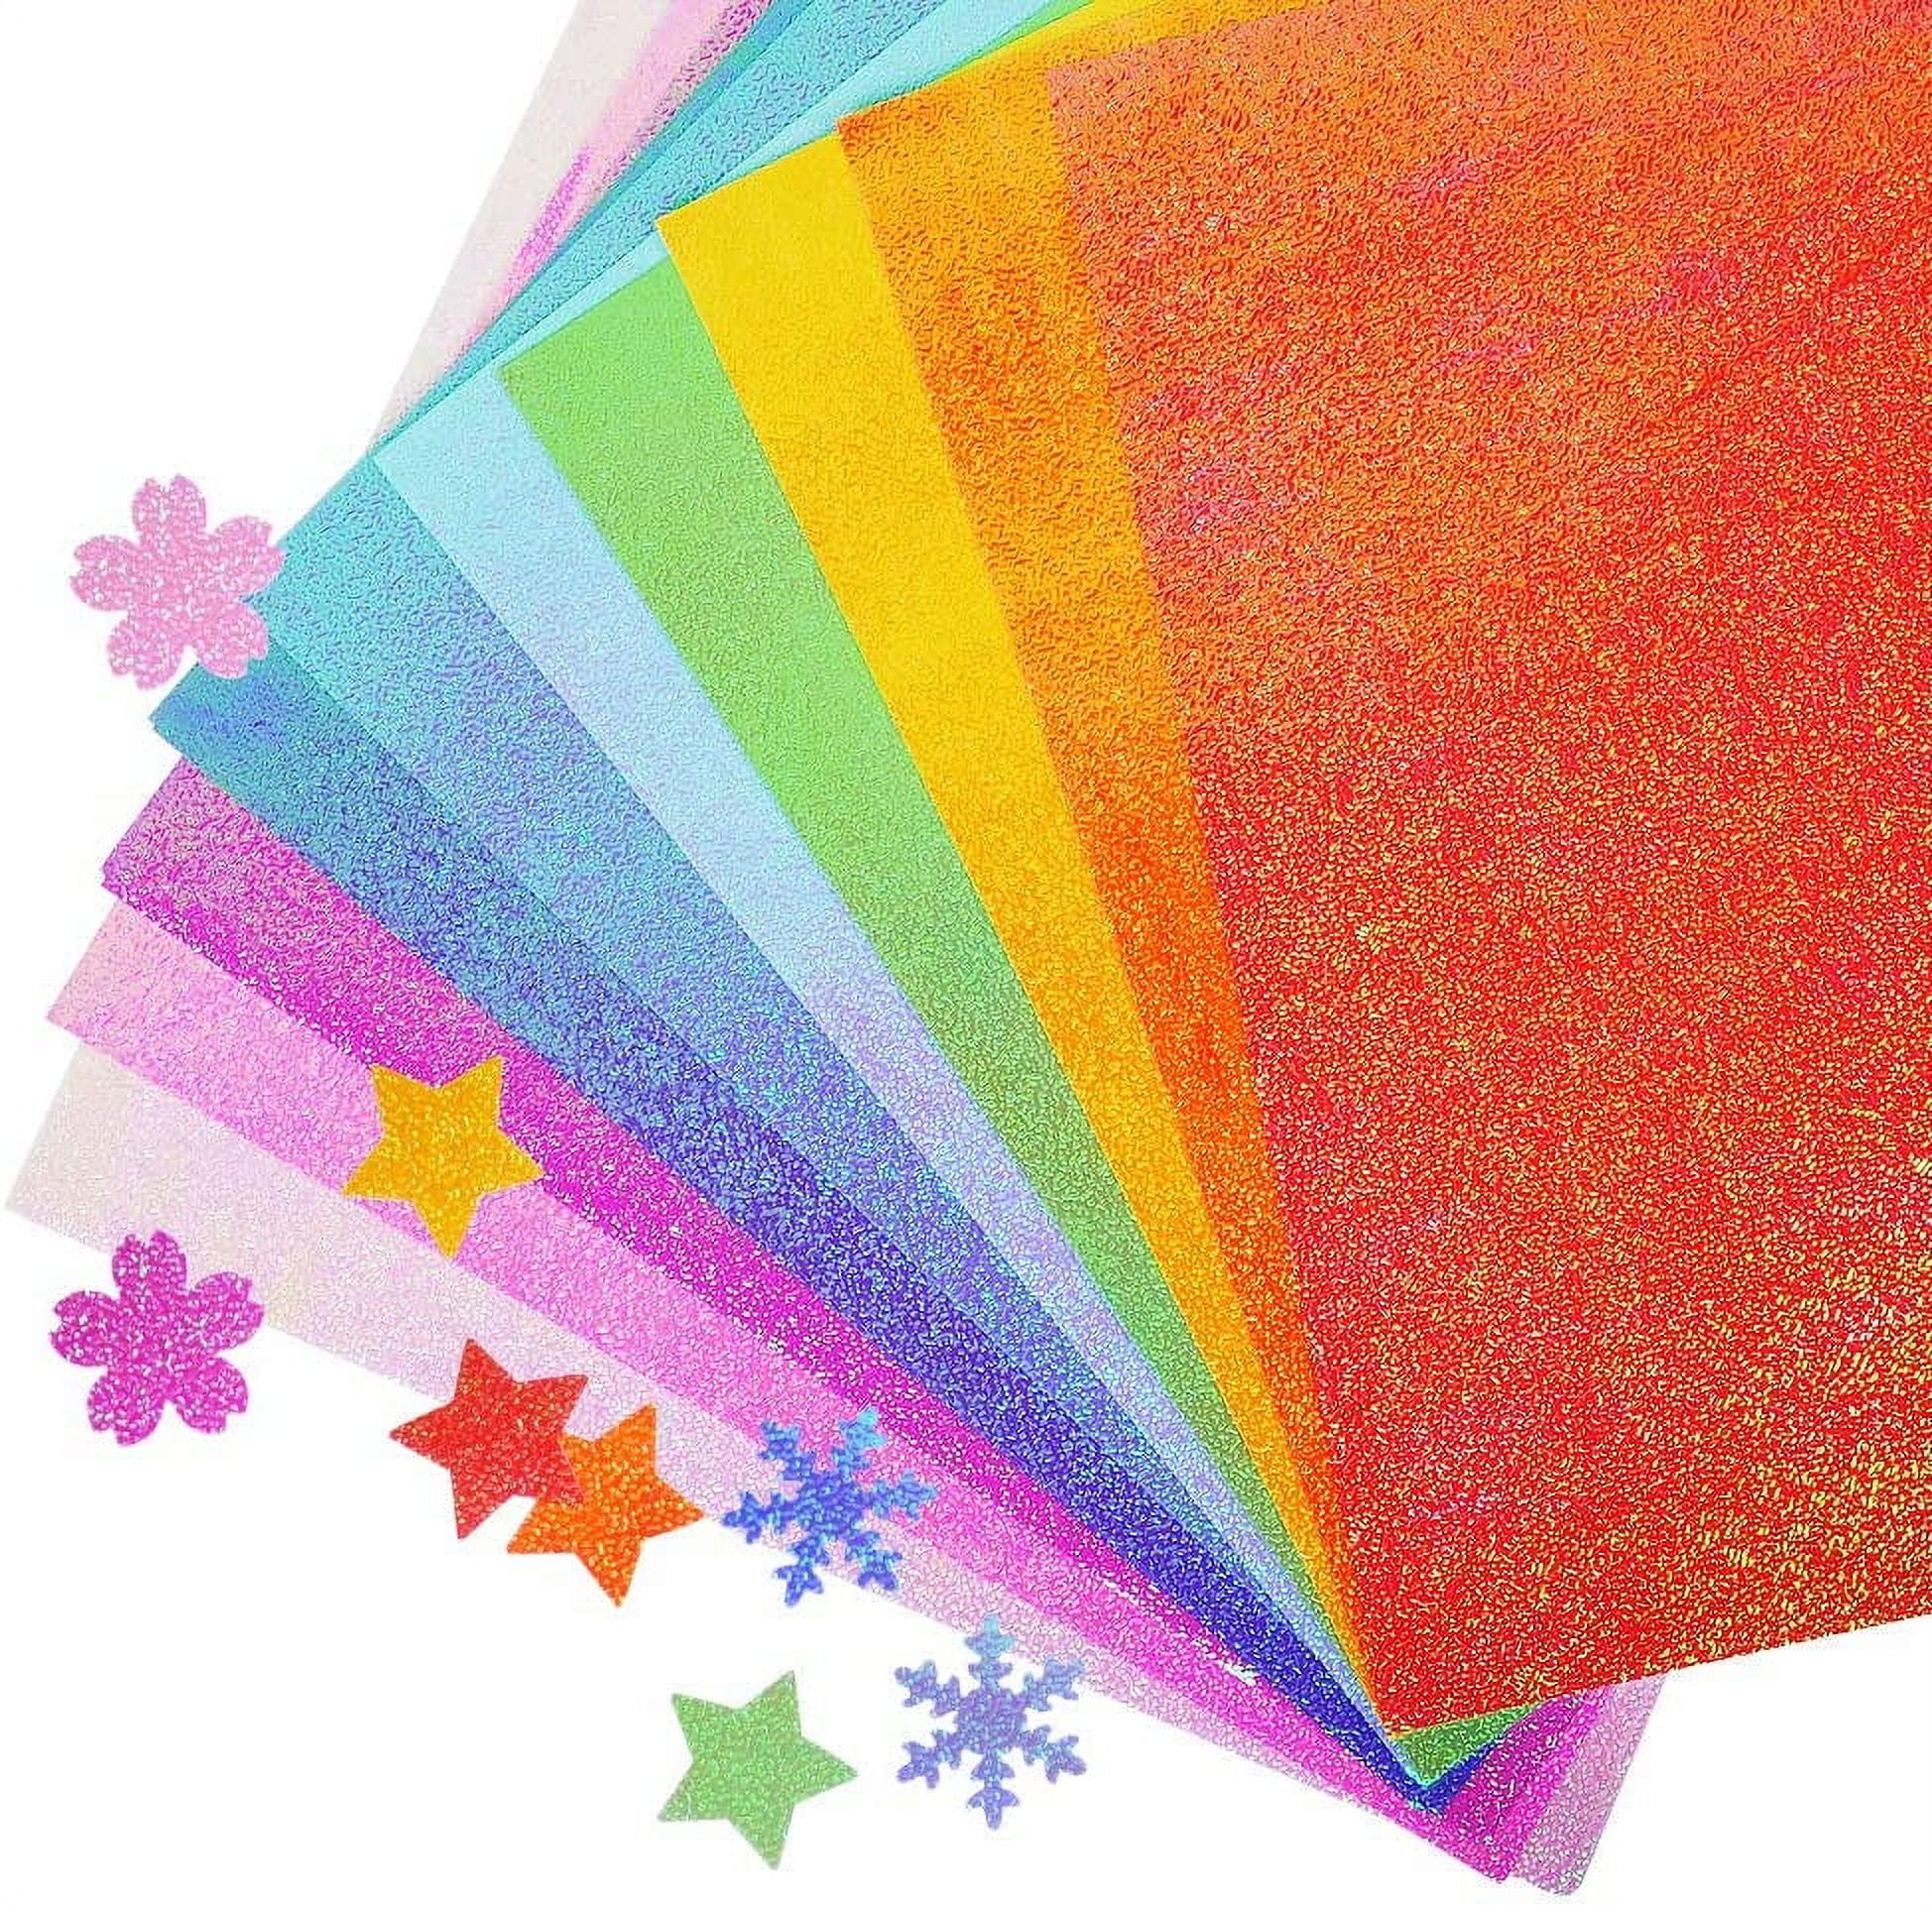  Gradient Glitter Cardstock Paper, 16 Sheets 4 Gradient Colors  Glitter Paper, 200gsm/74lb Premium A4 Sparkly Paper, Shinny Craft Paper for  Crafts, Card Making, DIY Project, Party Decor : Arts, Crafts